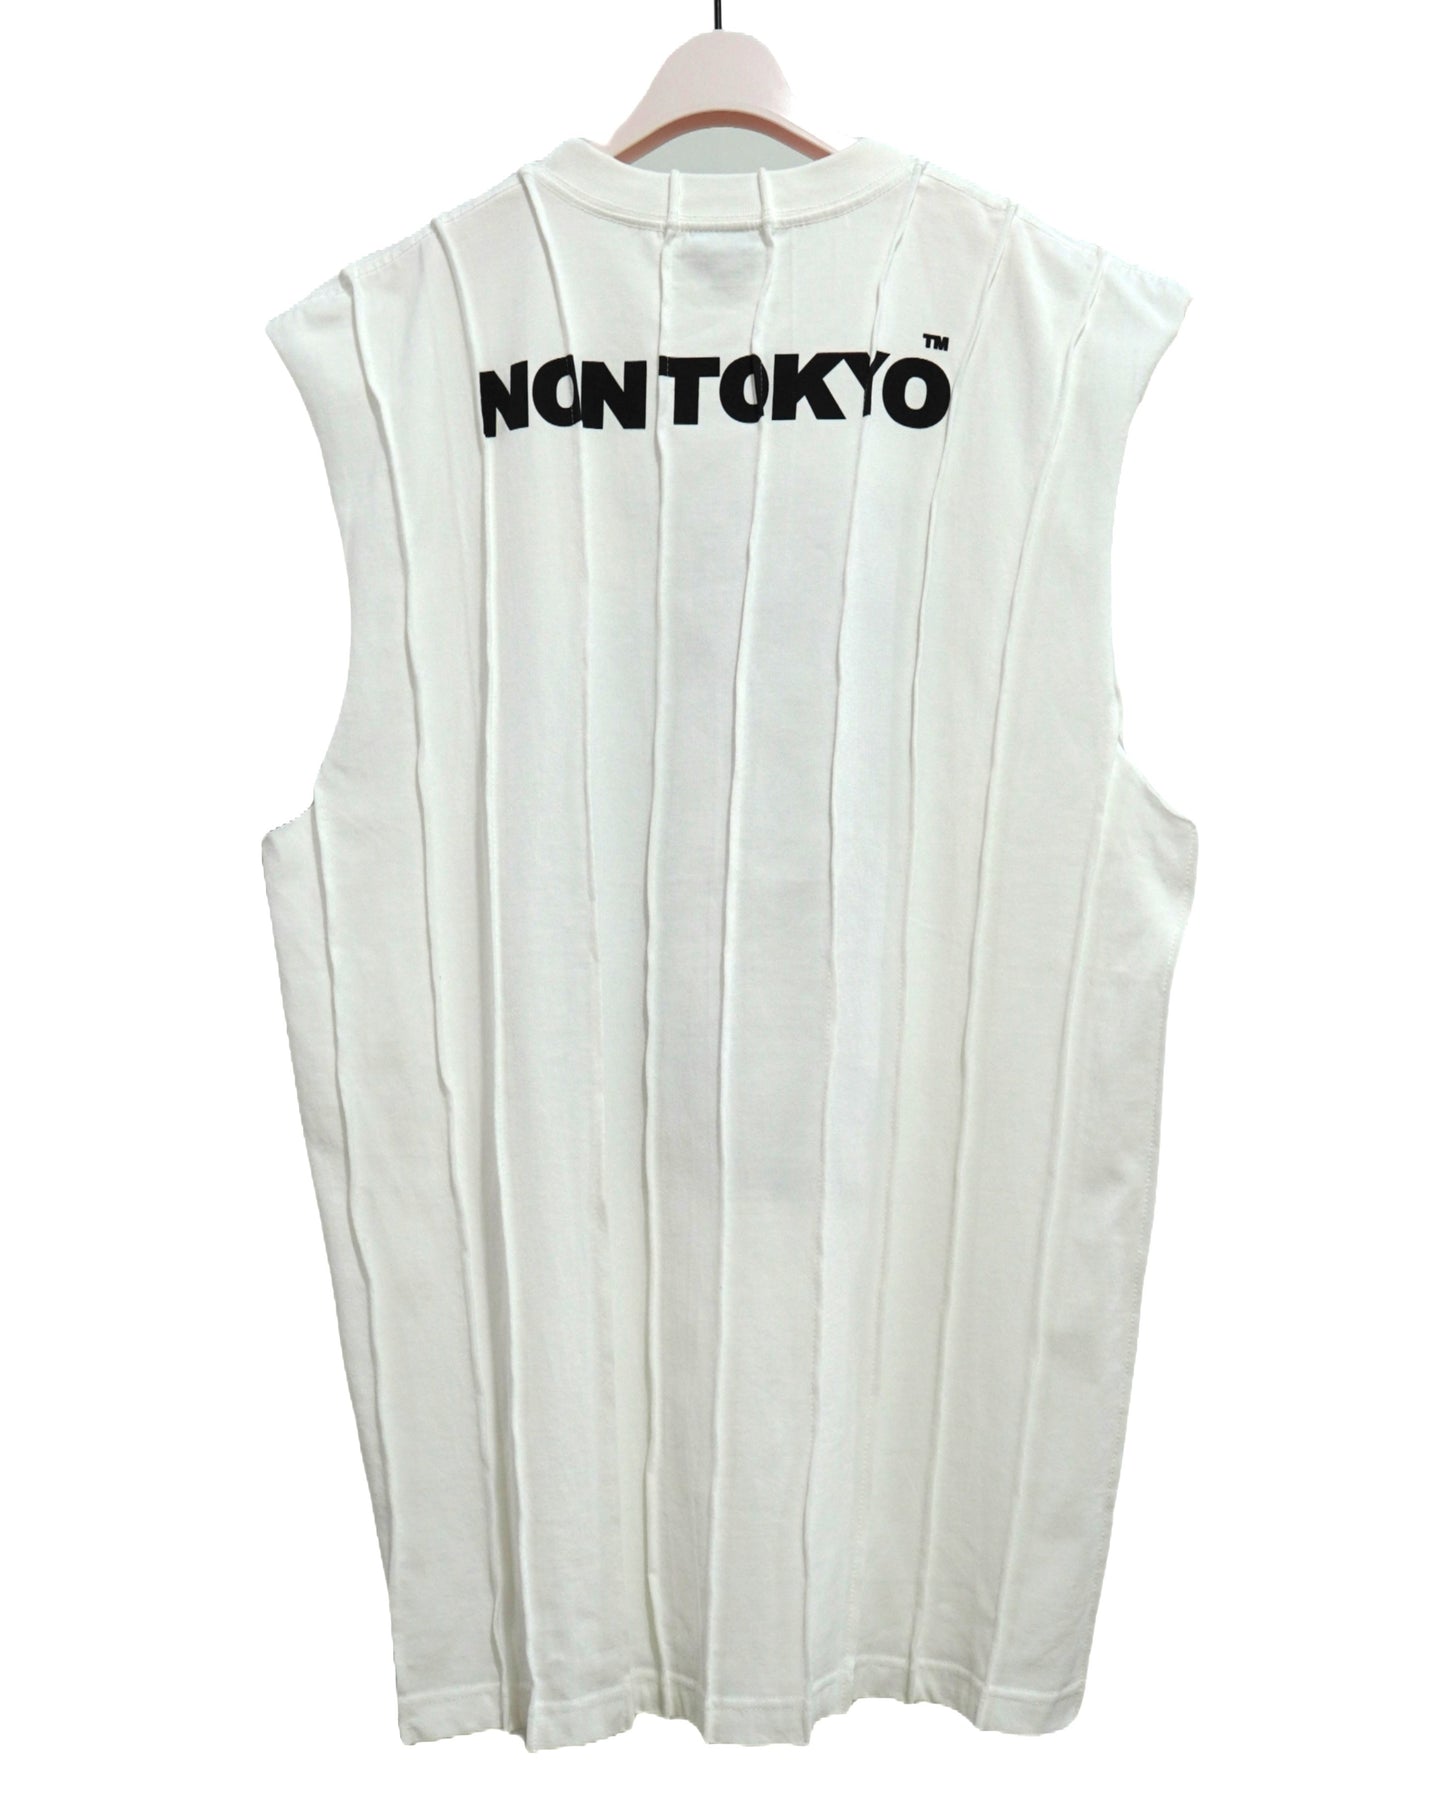 NON TOKYO /  PIN TUCK C/S (SIGNBOARD / WHITE) / 〈ノントーキョー〉ピンタックカットソー (看板 / ホワイト)